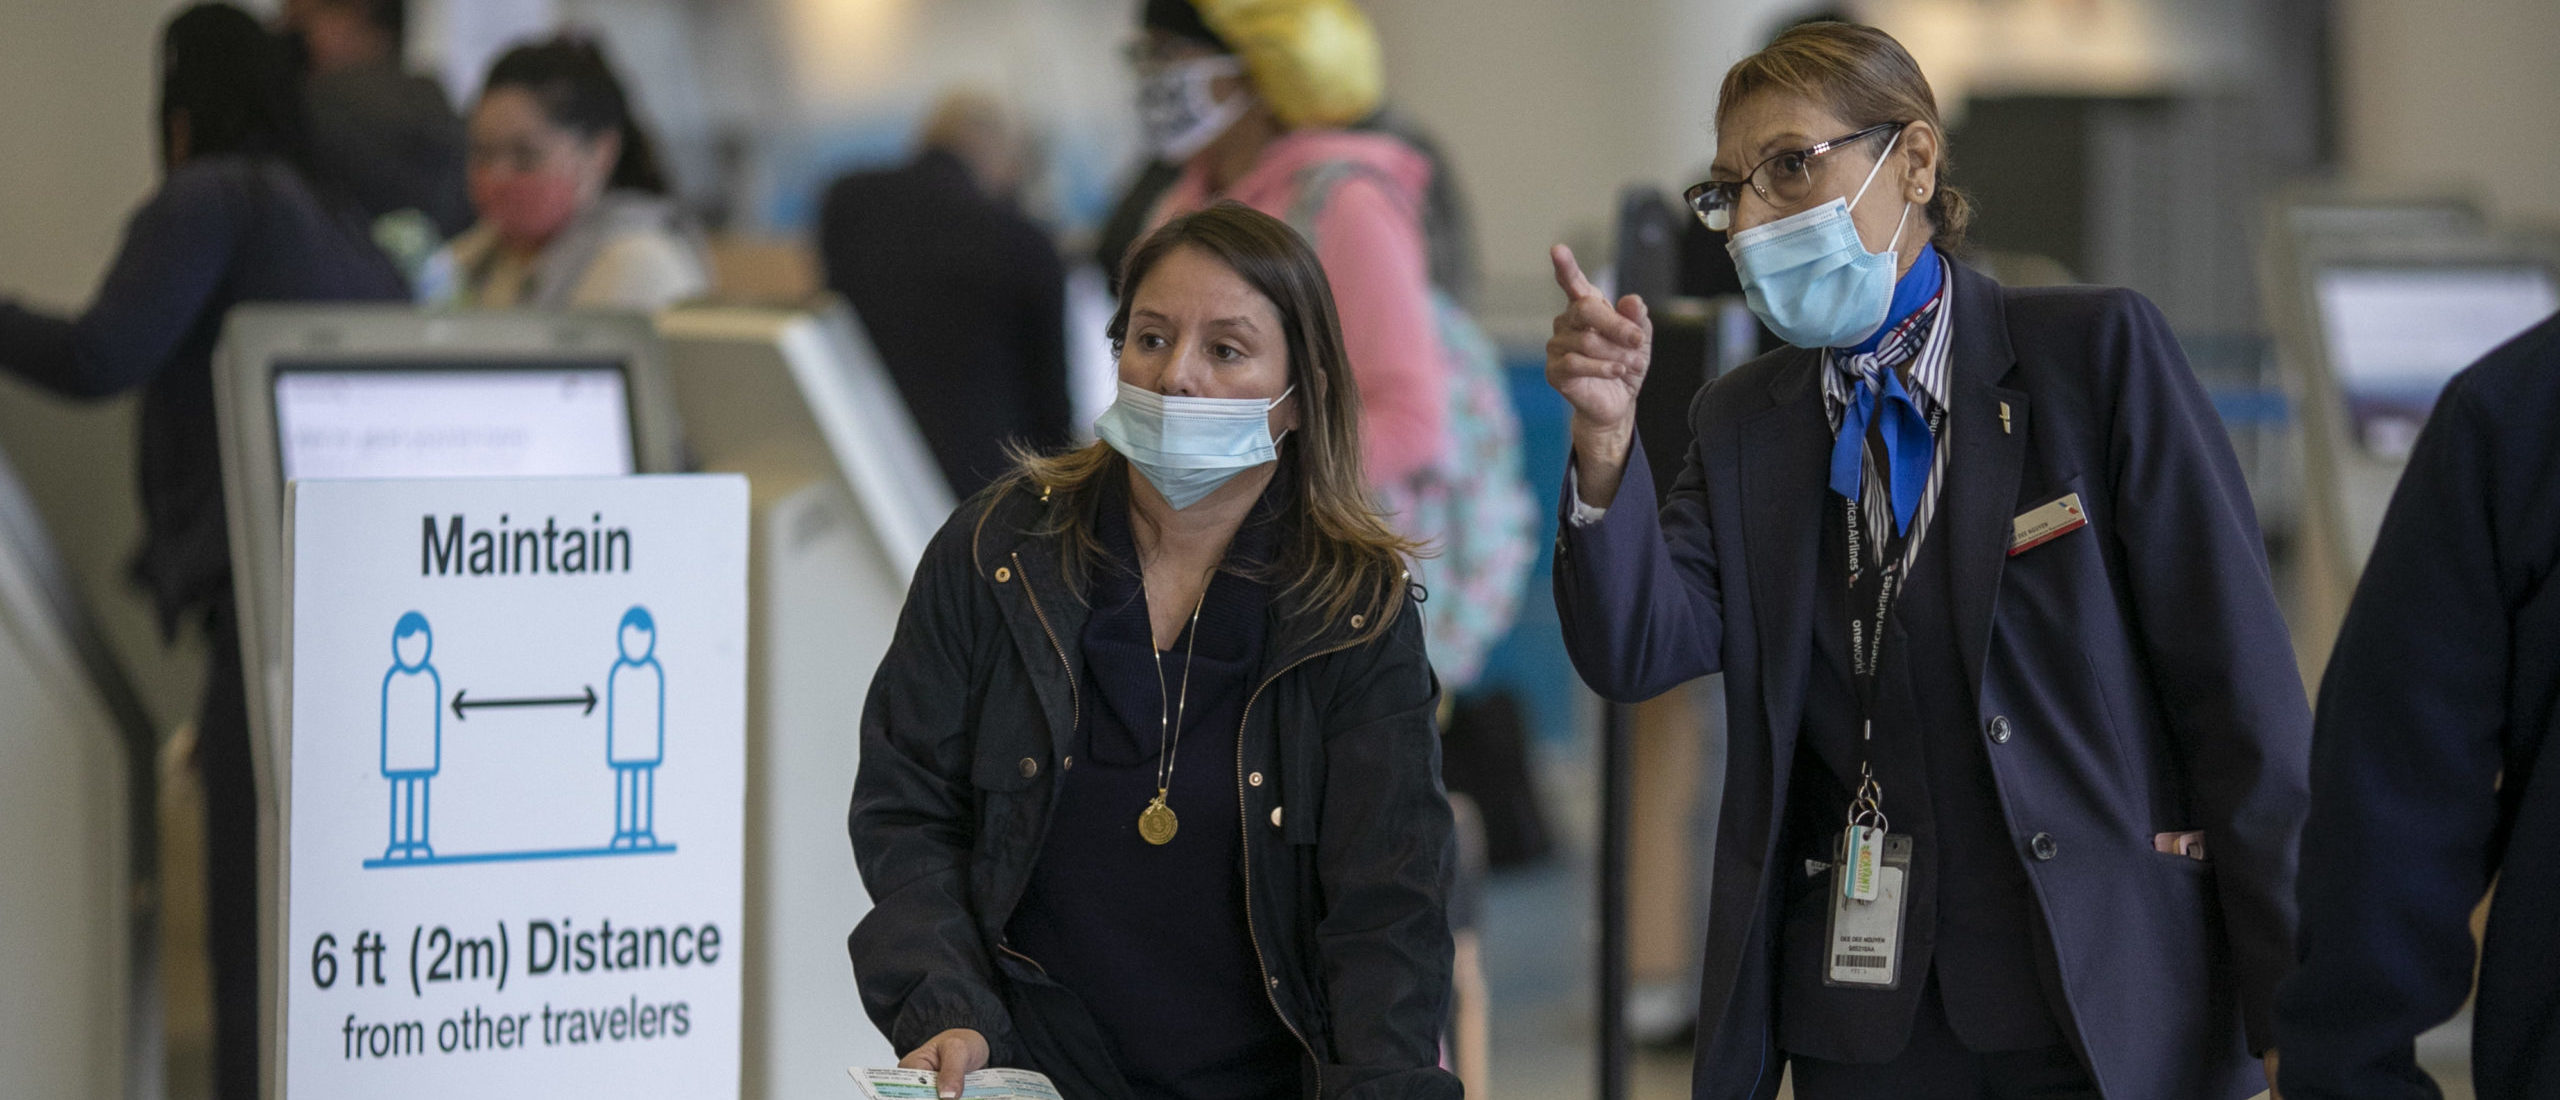 Domestic travelers will not need a negative coronavirus test before flying, CDC says